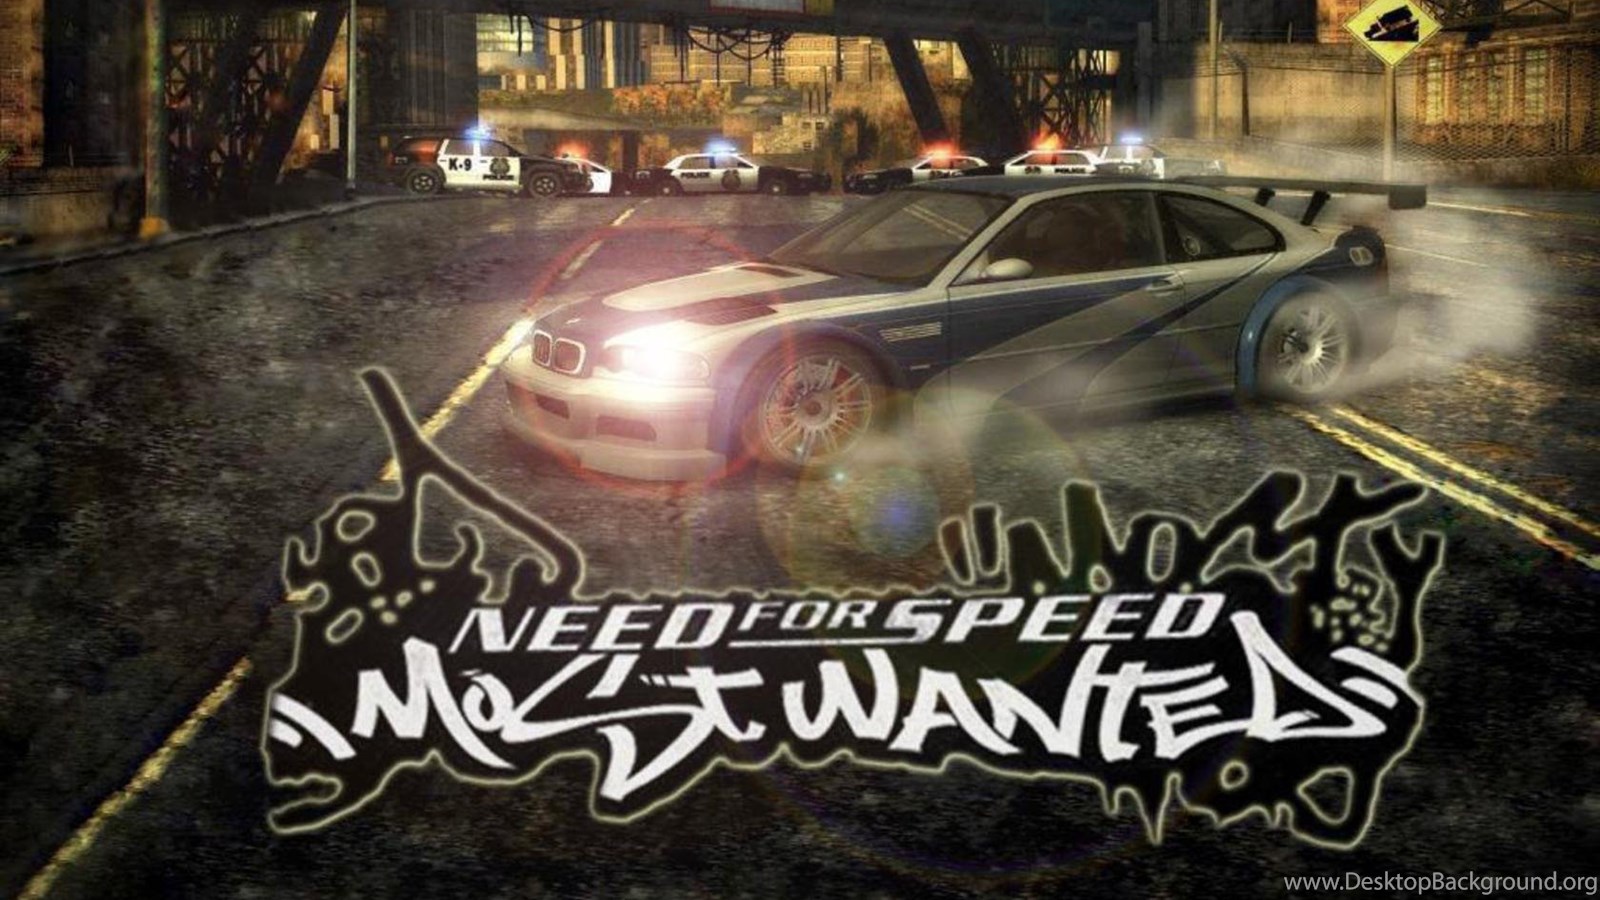 Музыка из мост вантед 2005. Новый NFS most wanted 2005. Most wanted 2005 геймплей. Need for Speed most wanted стрим. NFS MW 2005 Remake.